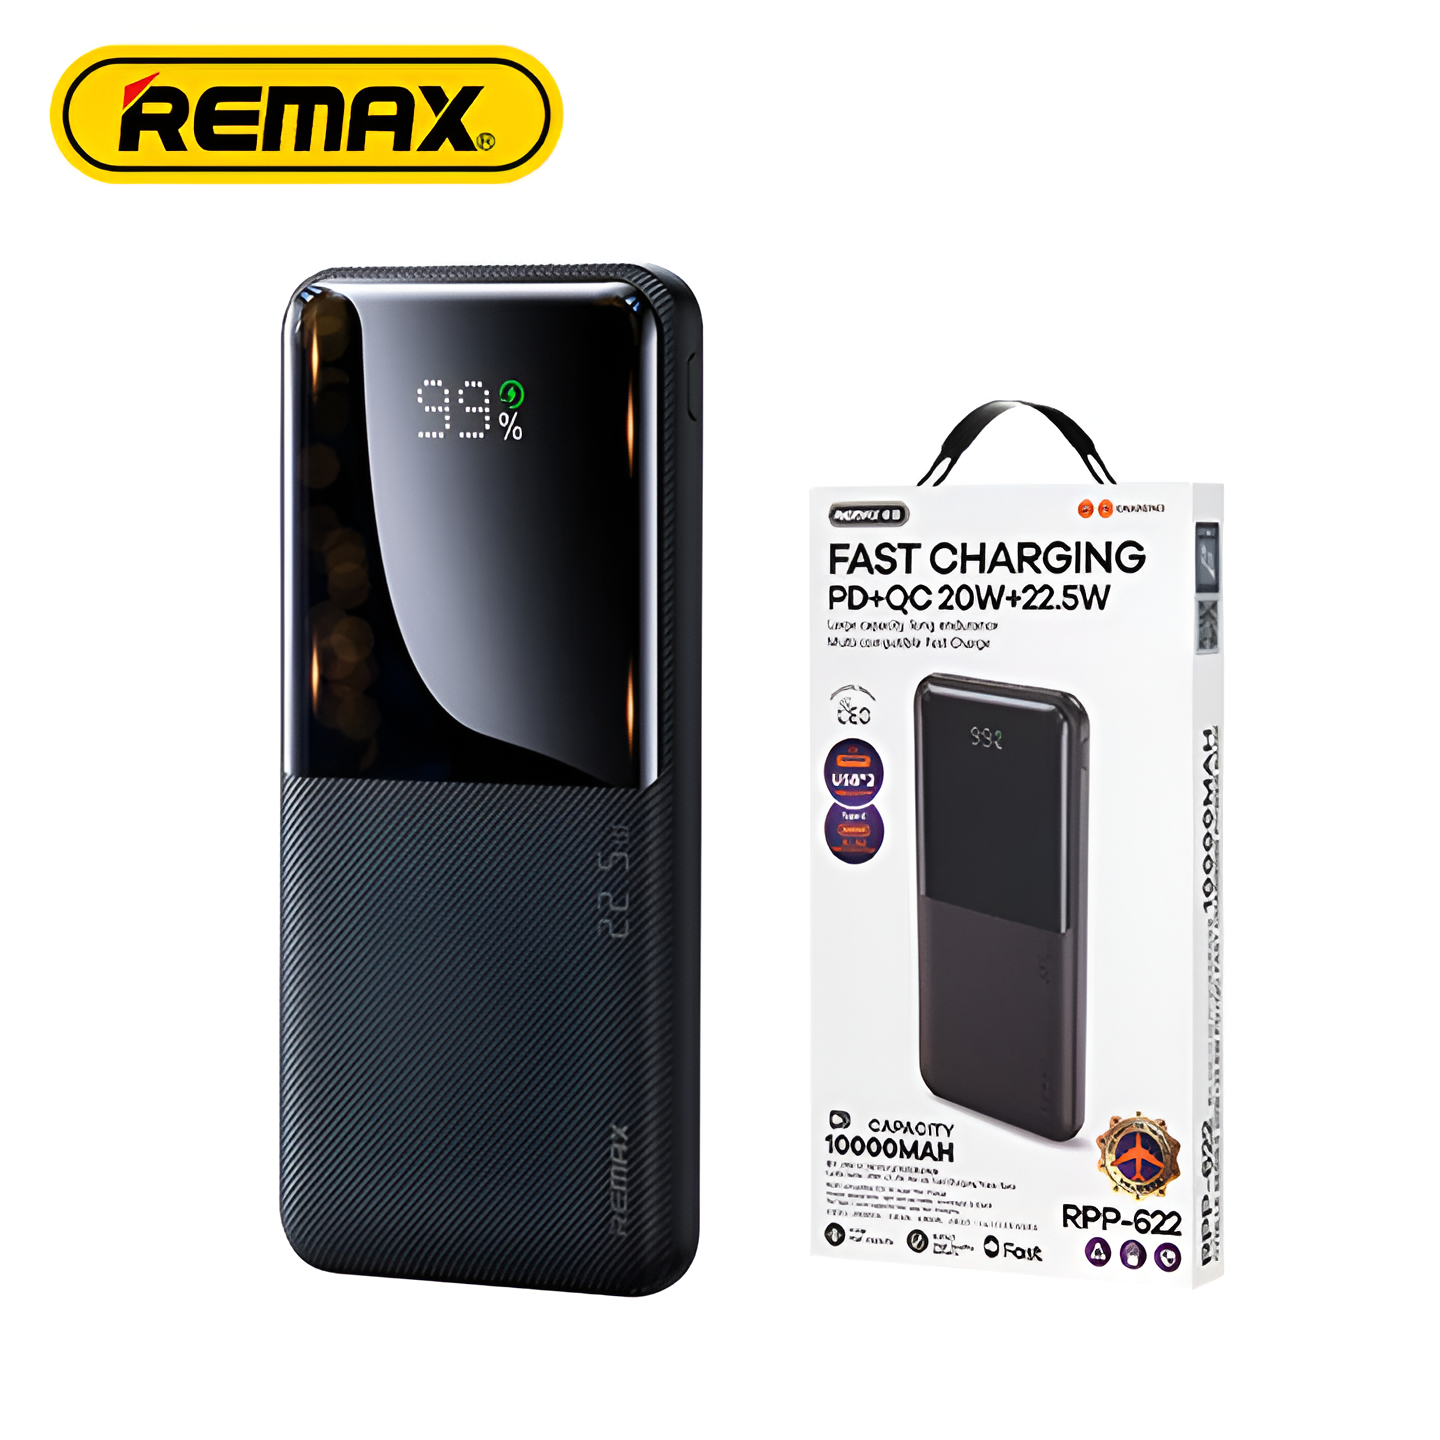 Power bank remax cynlle rpp-622 20w+22.5w pd/qc fast charge 10000mah (crni)